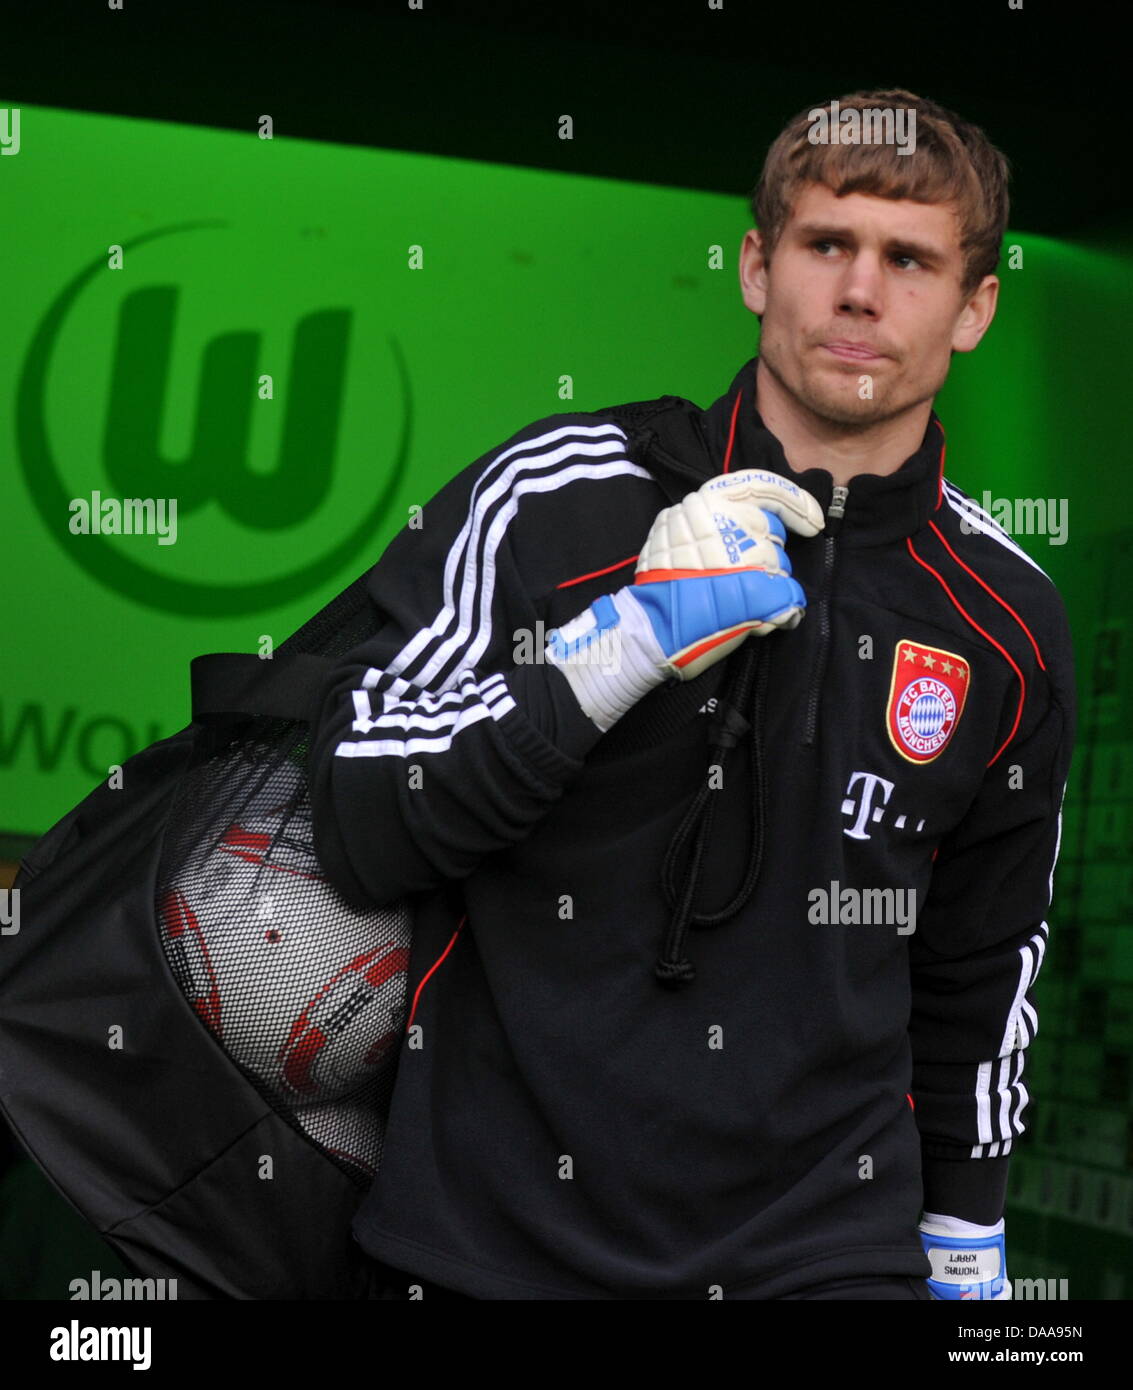 Munich's goalkeepers Thomas Kraft arrives at the pitch prior to German Bundesliga match VfL Wolfburg vs. FC Bayern Munich at the Volkswagen Arena in Munich, Germany, 15 January 2011. The match ended in a draw (1-1). Photo: Jochen Luebke Stock Photo